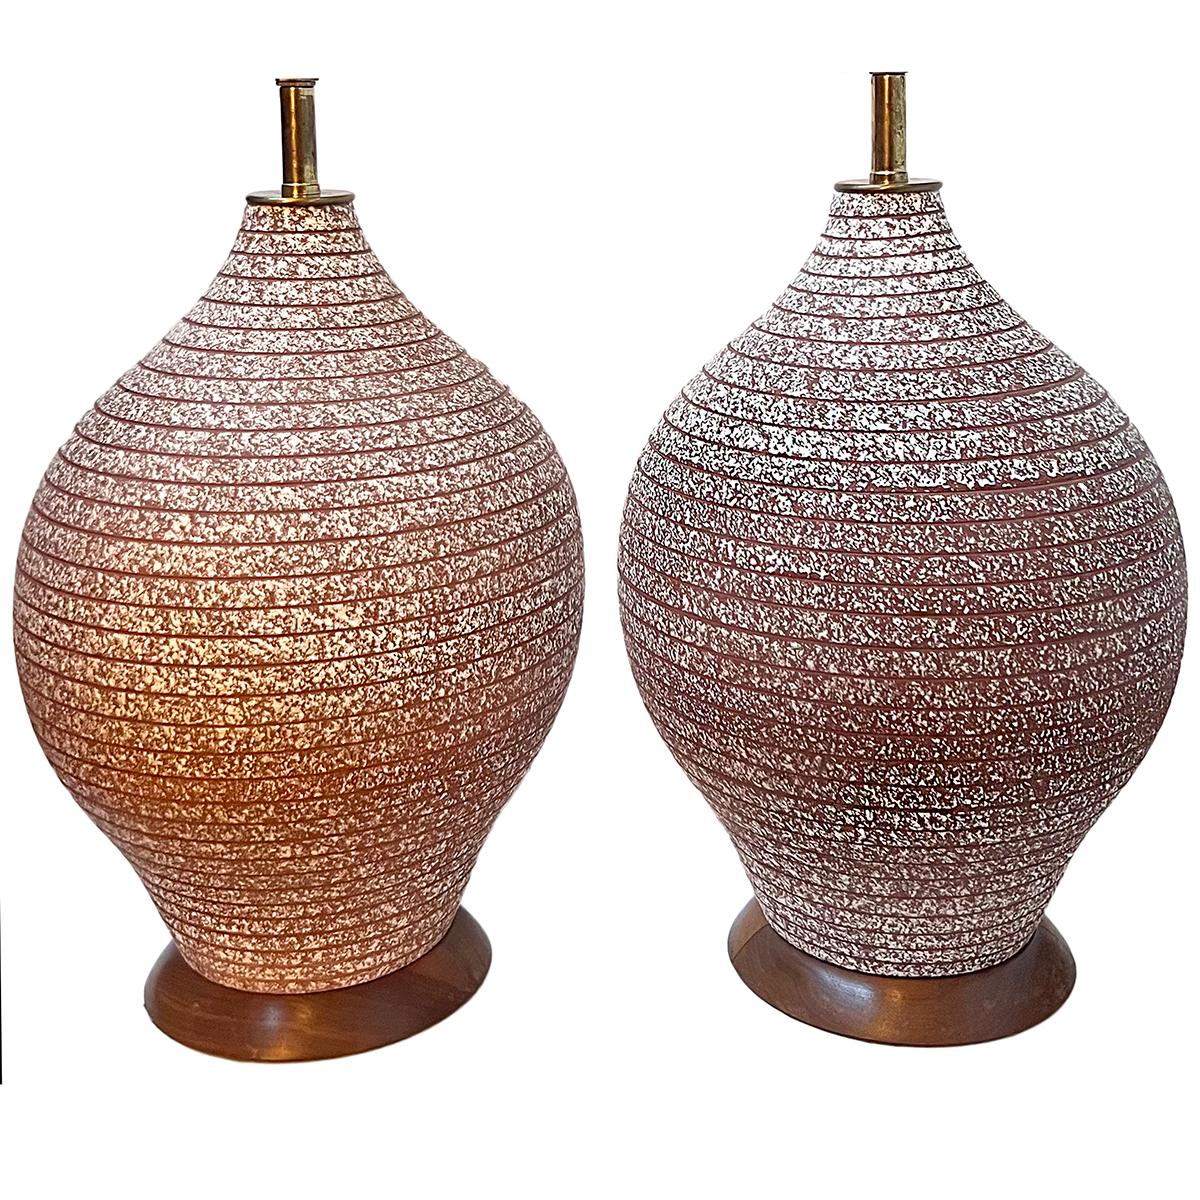 Pair of circa 1960's Italian pottery lamps with wooden bases.

Measurements:
Height of body: 17